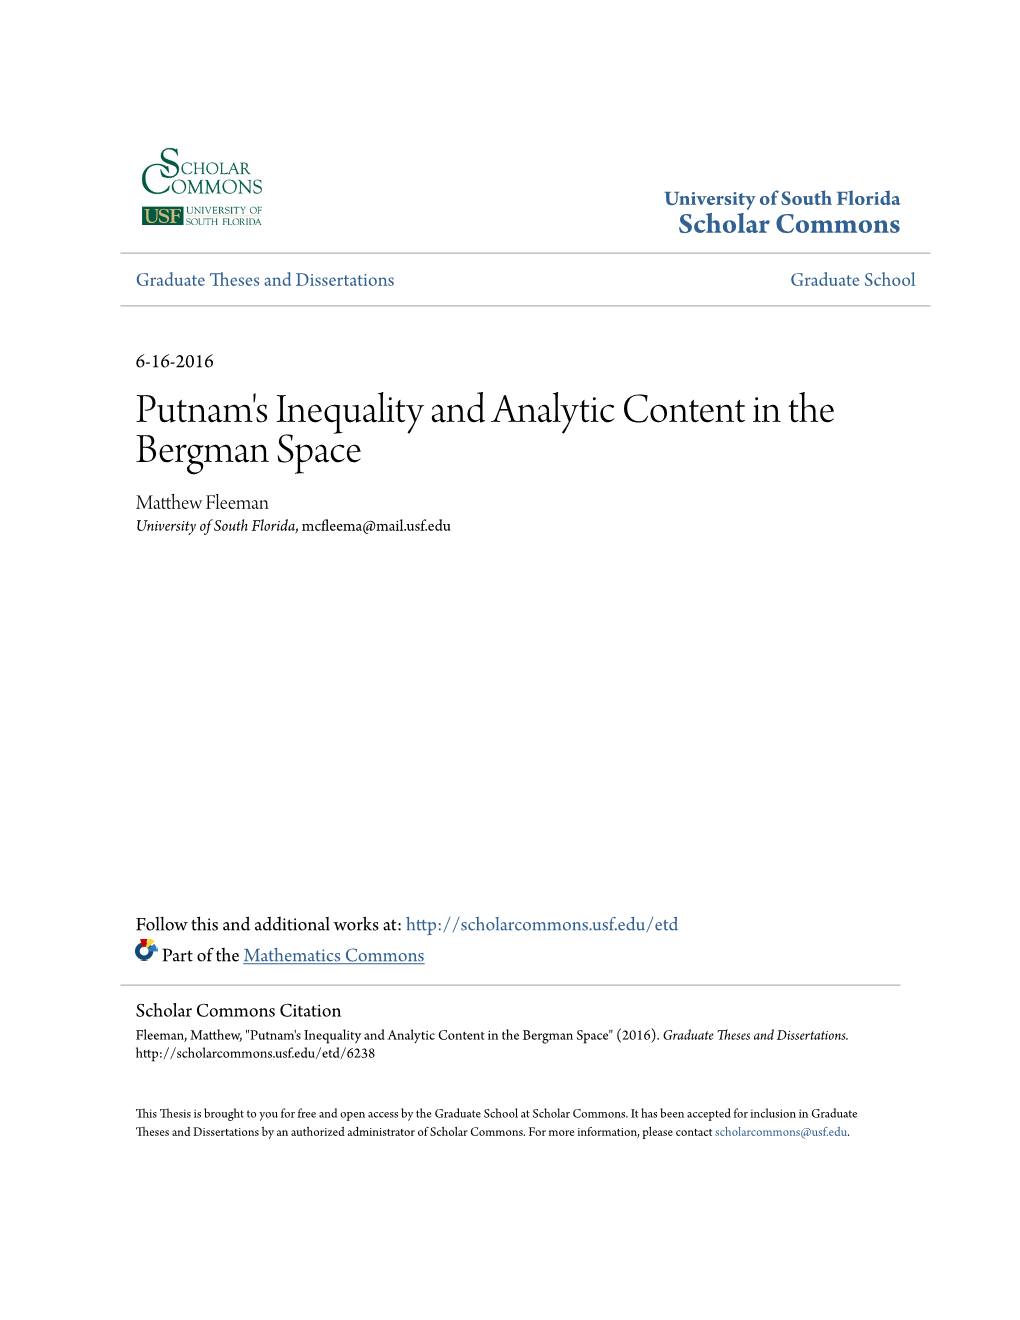 Putnam's Inequality and Analytic Content in the Bergman Space Matthew Leef Man University of South Florida, Mcfleema@Mail.Usf.Edu